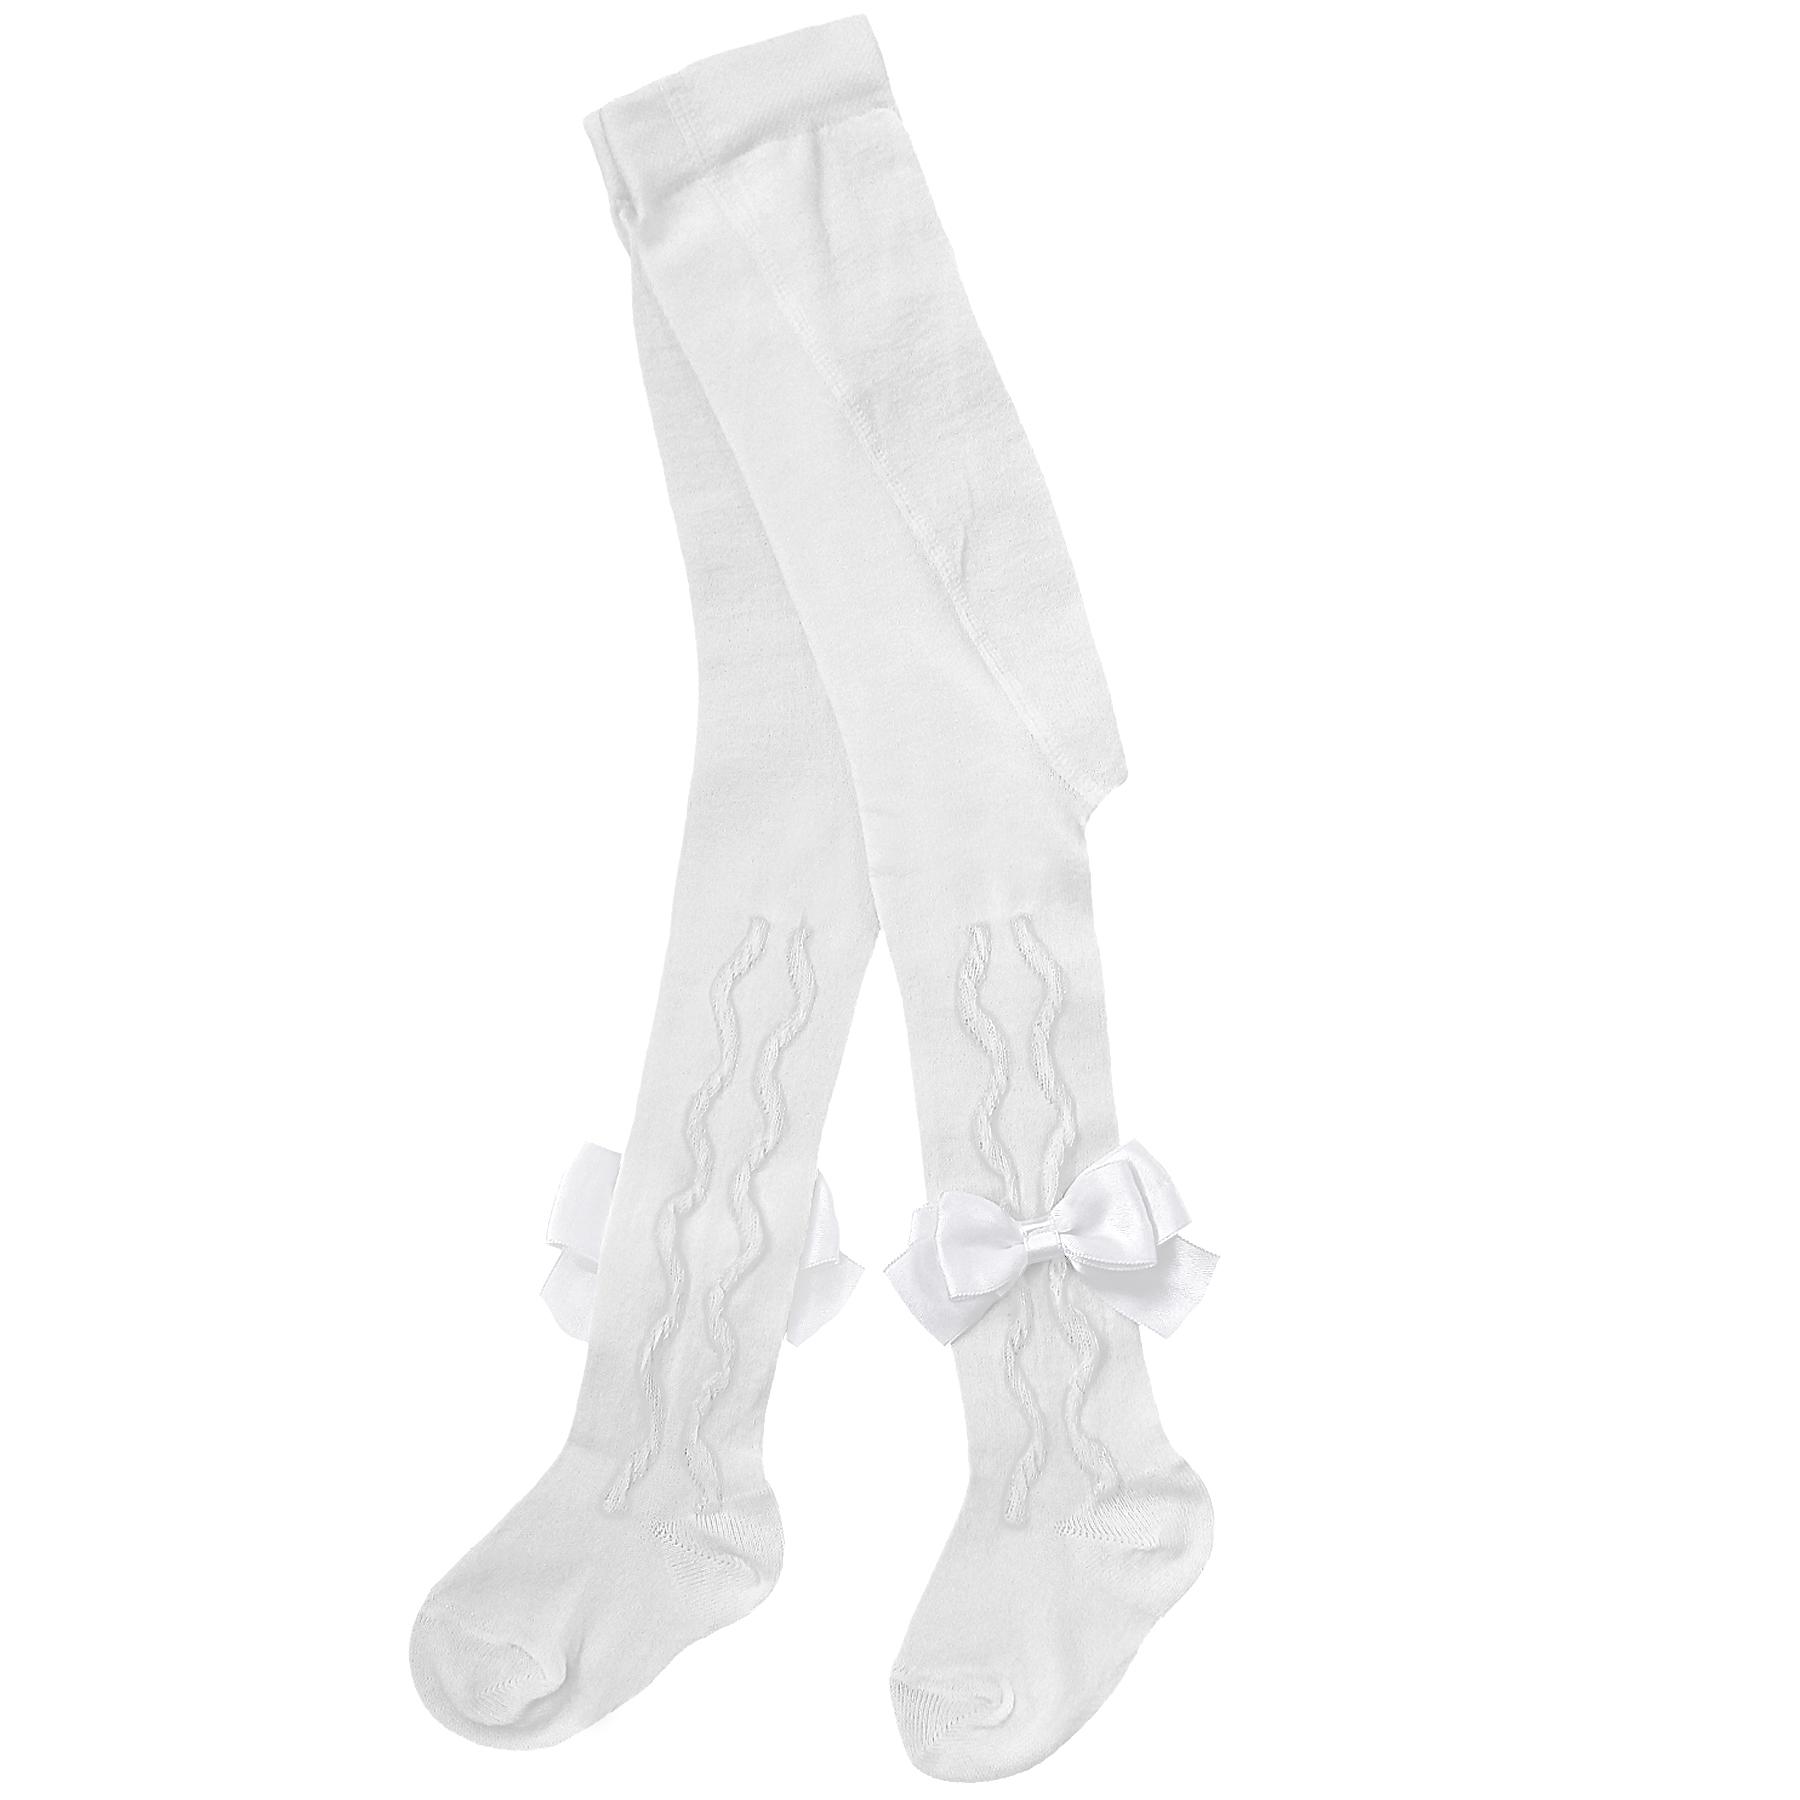 Pex Kids Grazia Tights with Side Ruffles & Bows in White